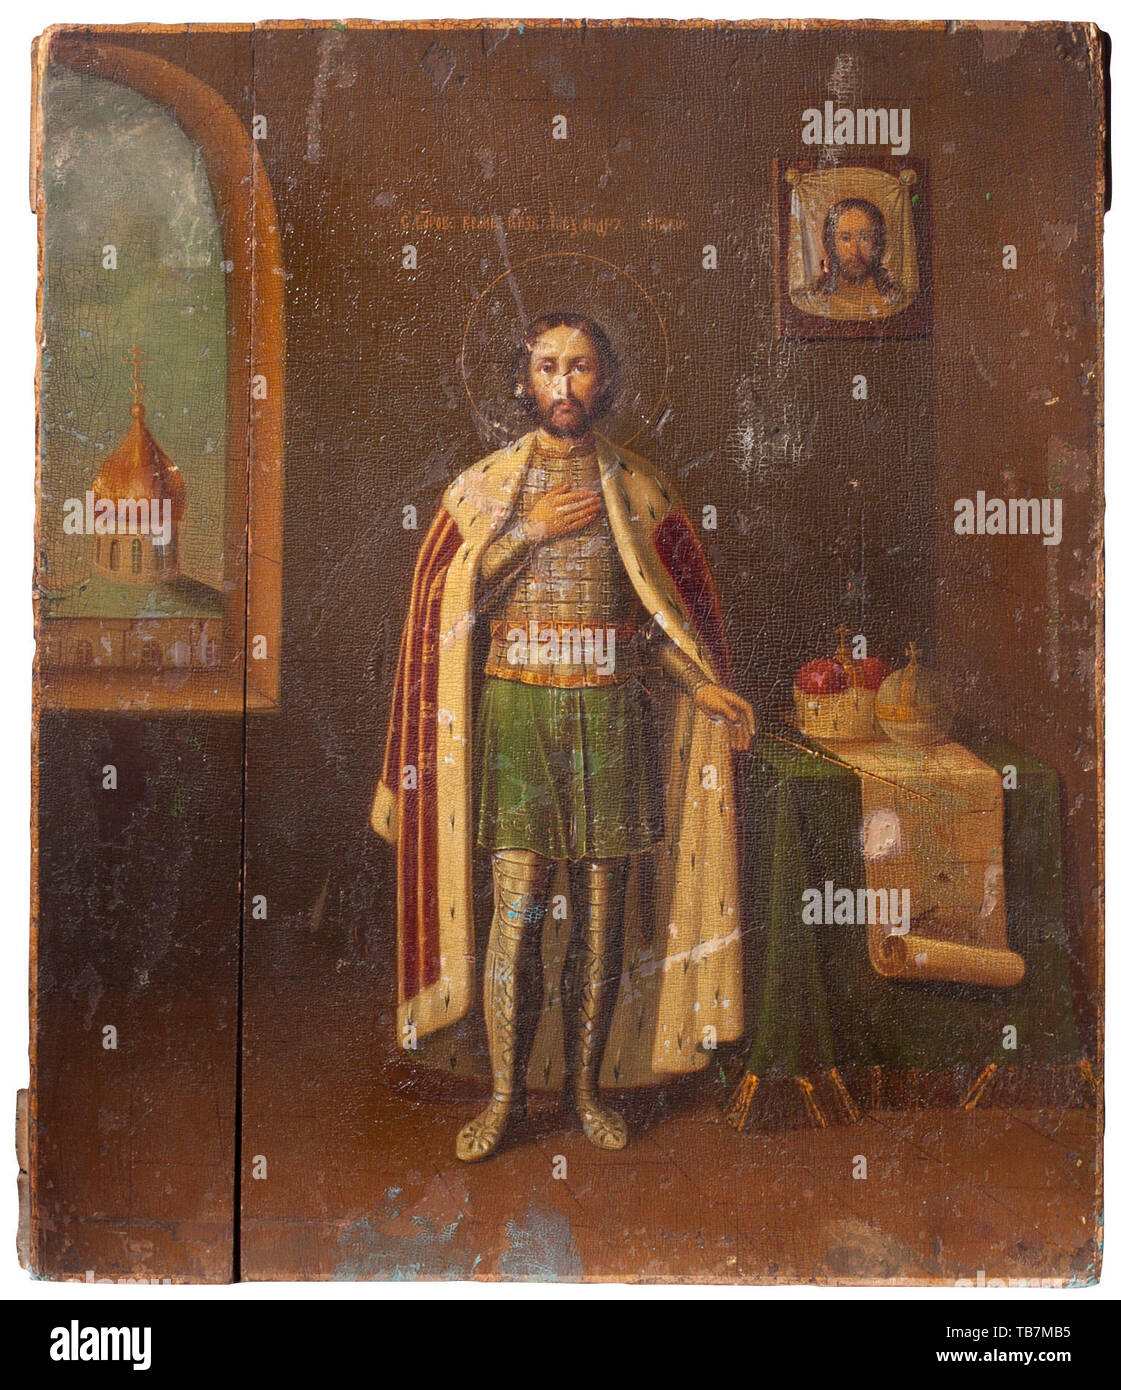 A Russian icon 'Alexander Nevsky', 19th century, Egg tempera on wood. Depiction of Alexander, the Grand Duke of Vladimir, who defeated the Swedes and the Teutonic Knights in 1240 at the Neva River. In the background hangs the Mandylion. the image of Christ's face left on the cloth Veronica used to wipe his face on the way to the Calvary. USA-lot. historic, historical 19th century, Additional-Rights-Clearance-Info-Not-Available Stock Photo